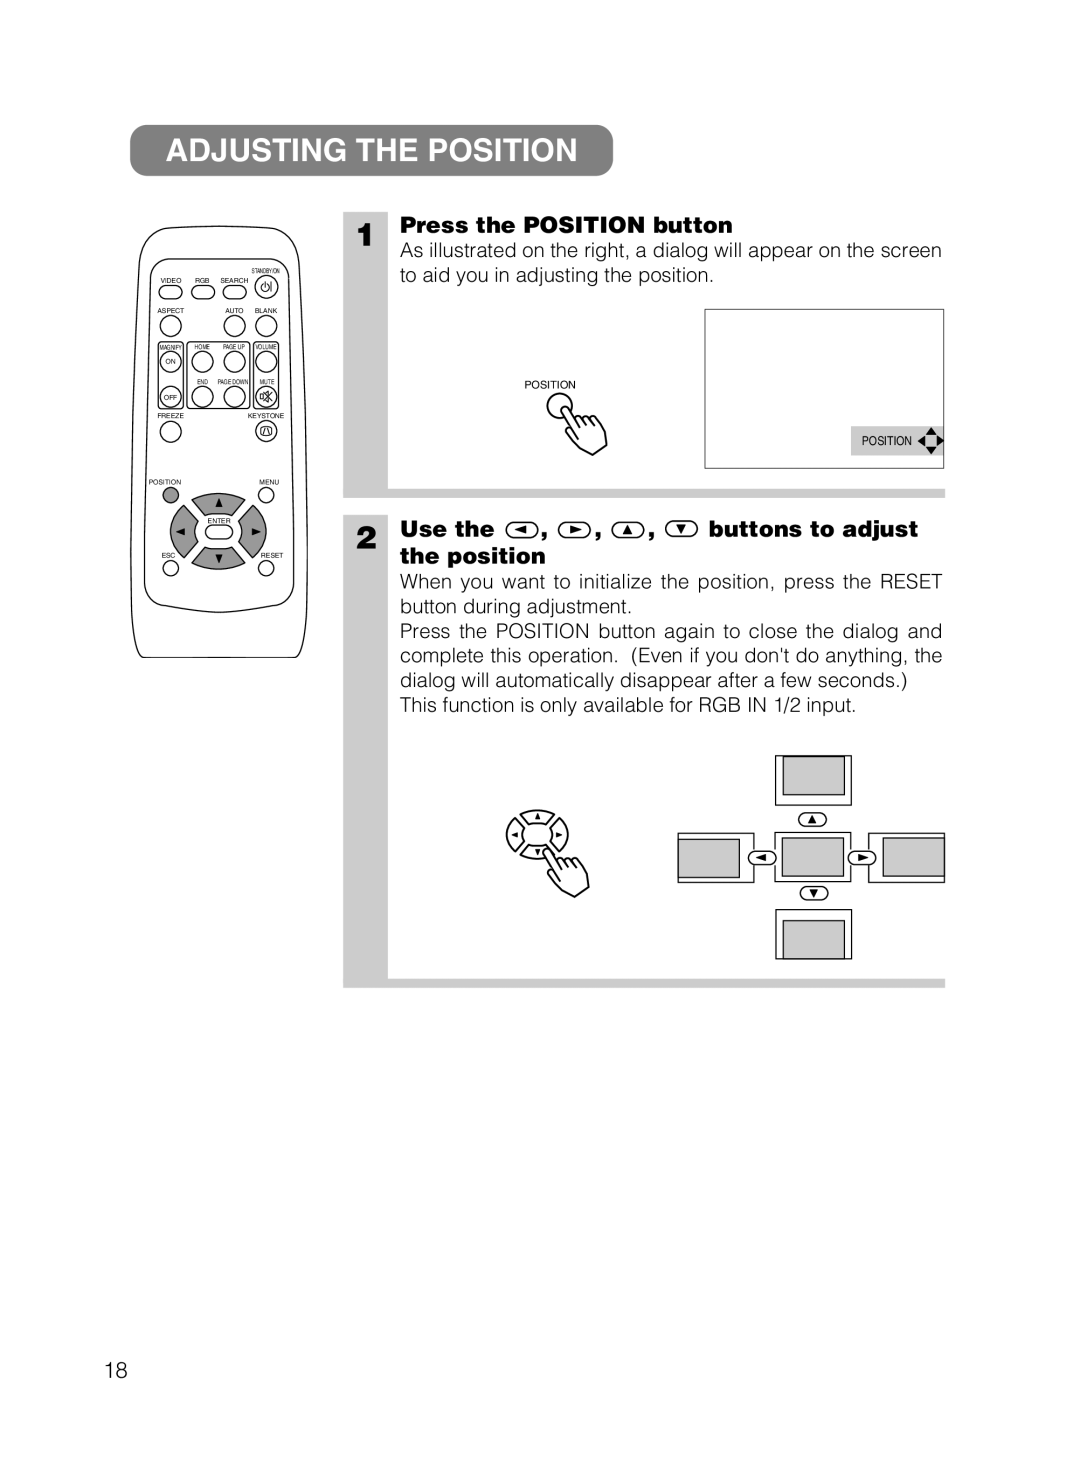 Dukane 28A8049B user manual Adjusting The Position, Press the POSITION button, Use the, the position, buttons to adjust 